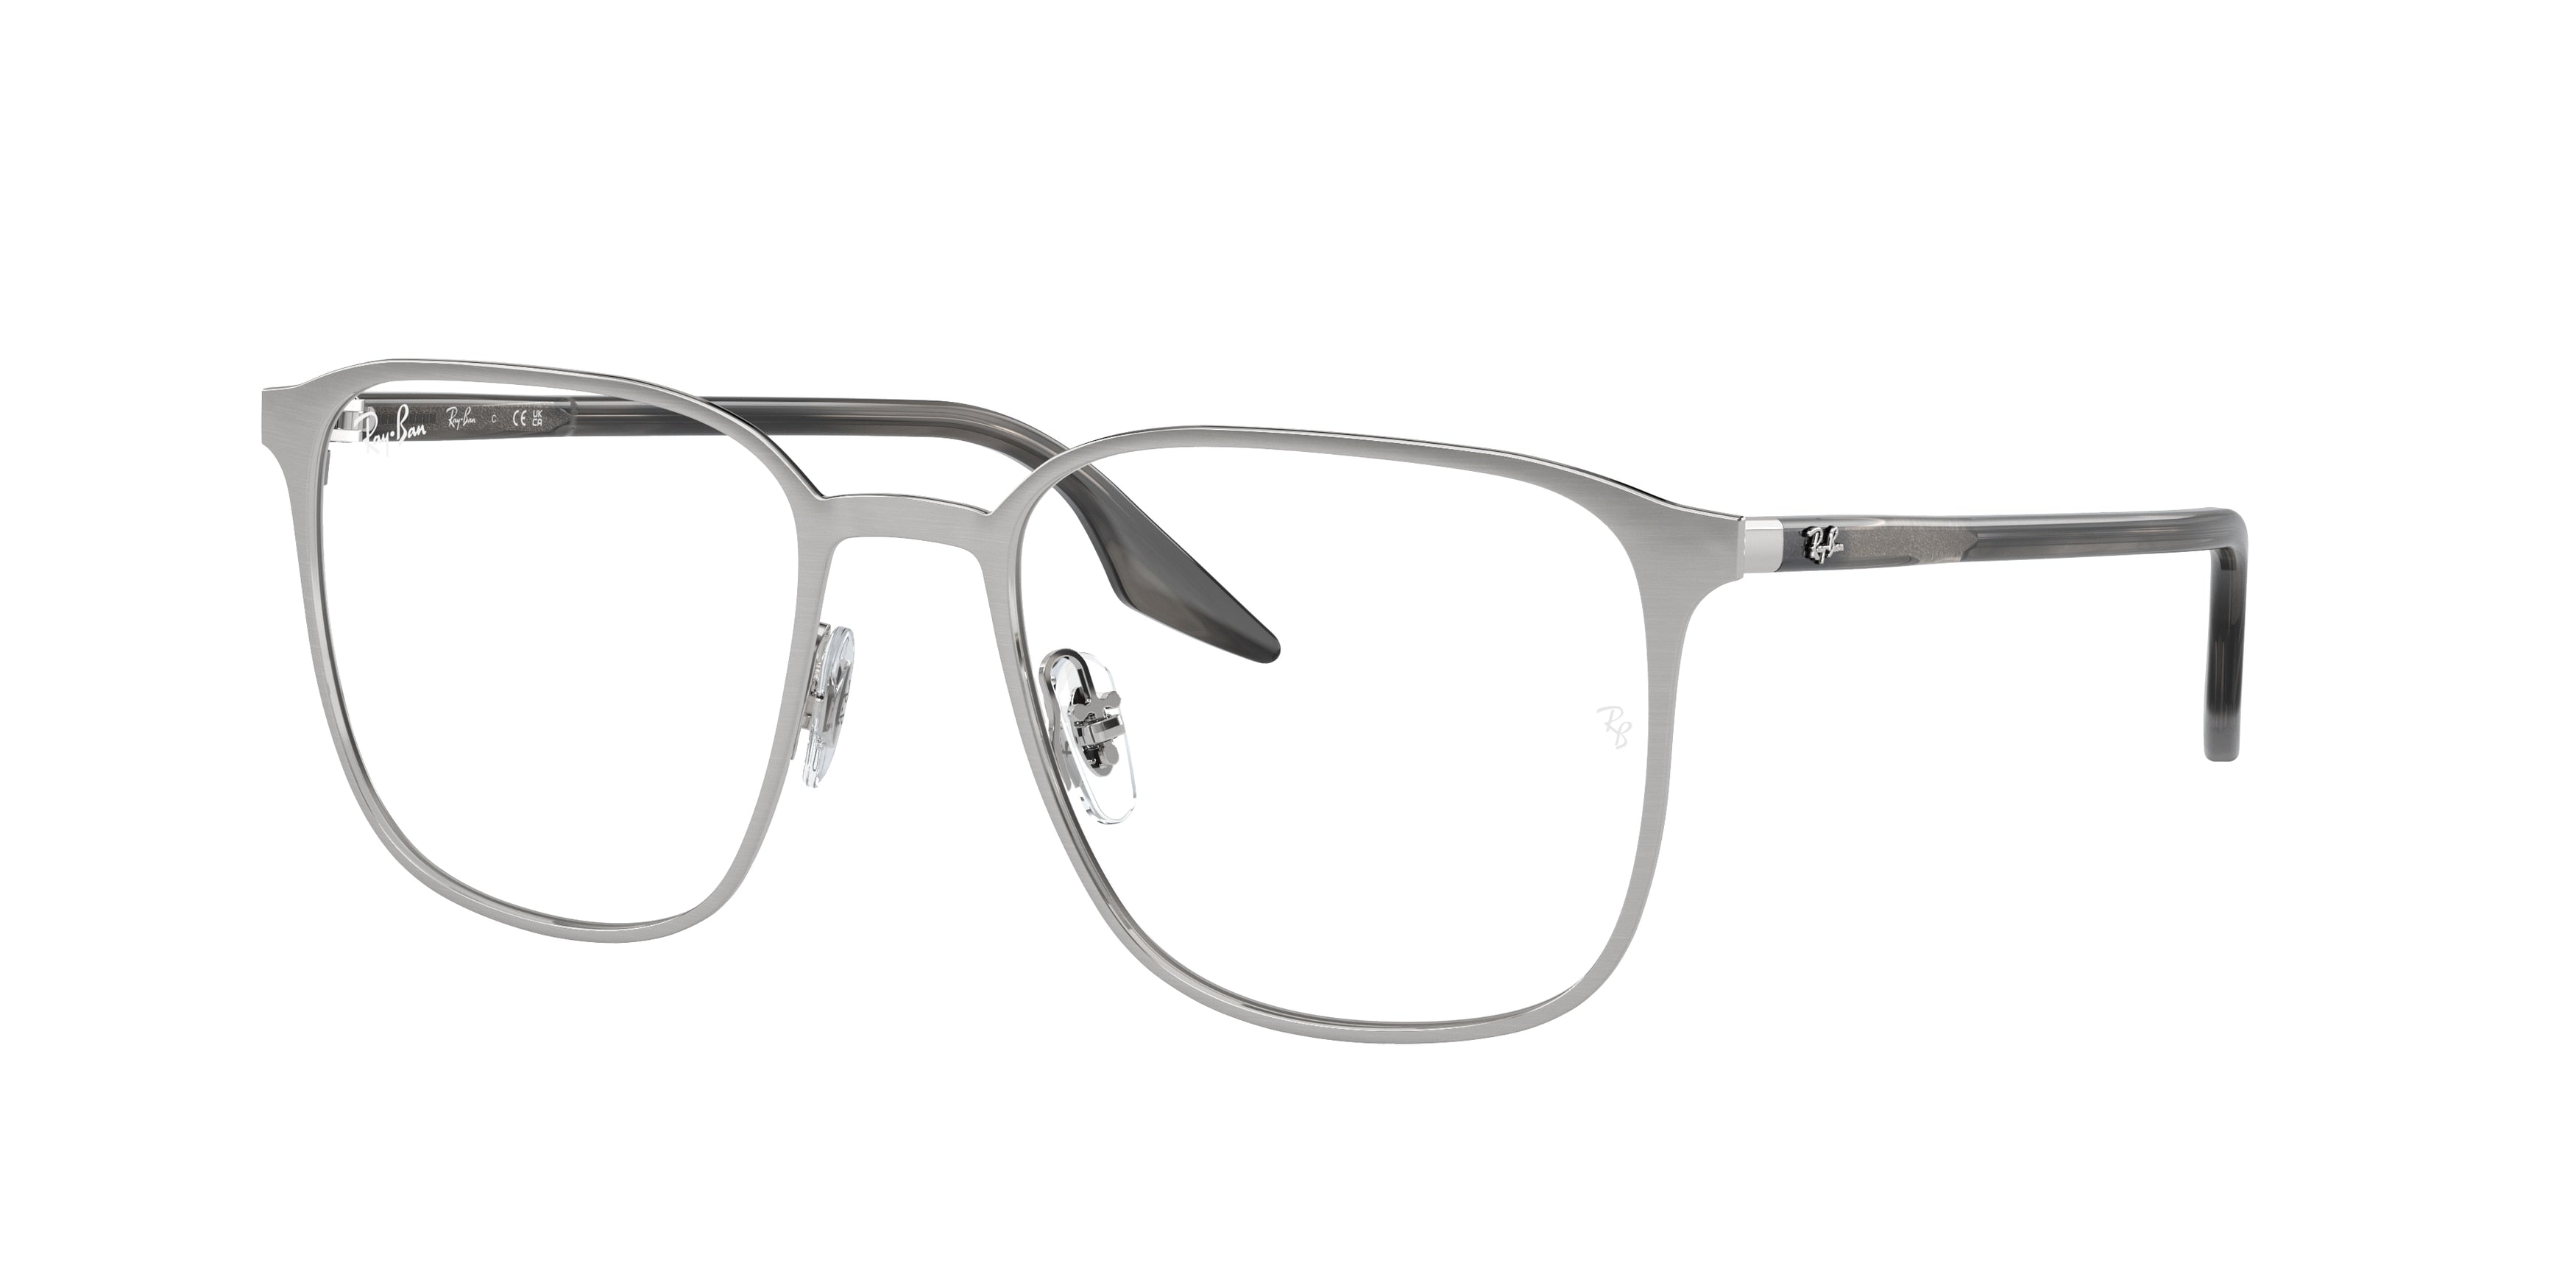 Ray-Ban Optical RX6512 Square Eyeglasses  2595-Silver 54-145-19 - Color Map Silver